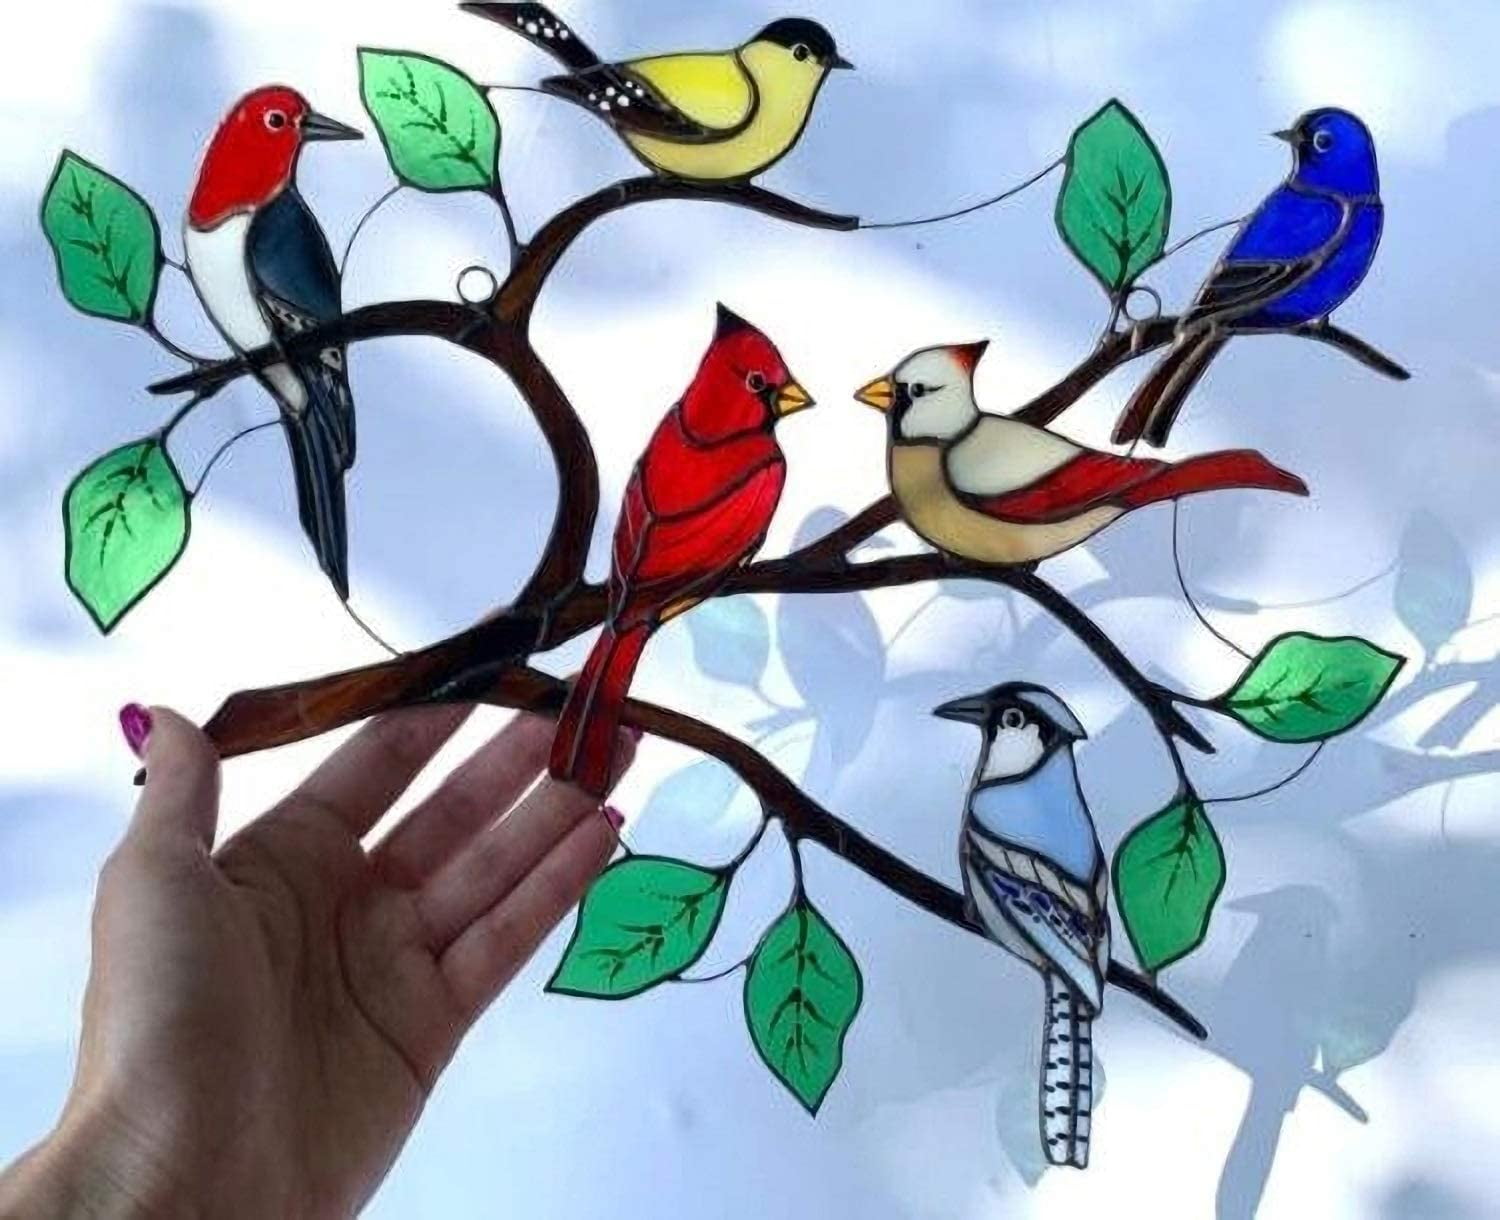 Bird Series Ornaments Pendant Home Decoration Multicolor Birds on a Wire High Stained Glass Suncatcher Window Panel Hanging for Windows Doors Home Decoration and Gifts 4 Birds